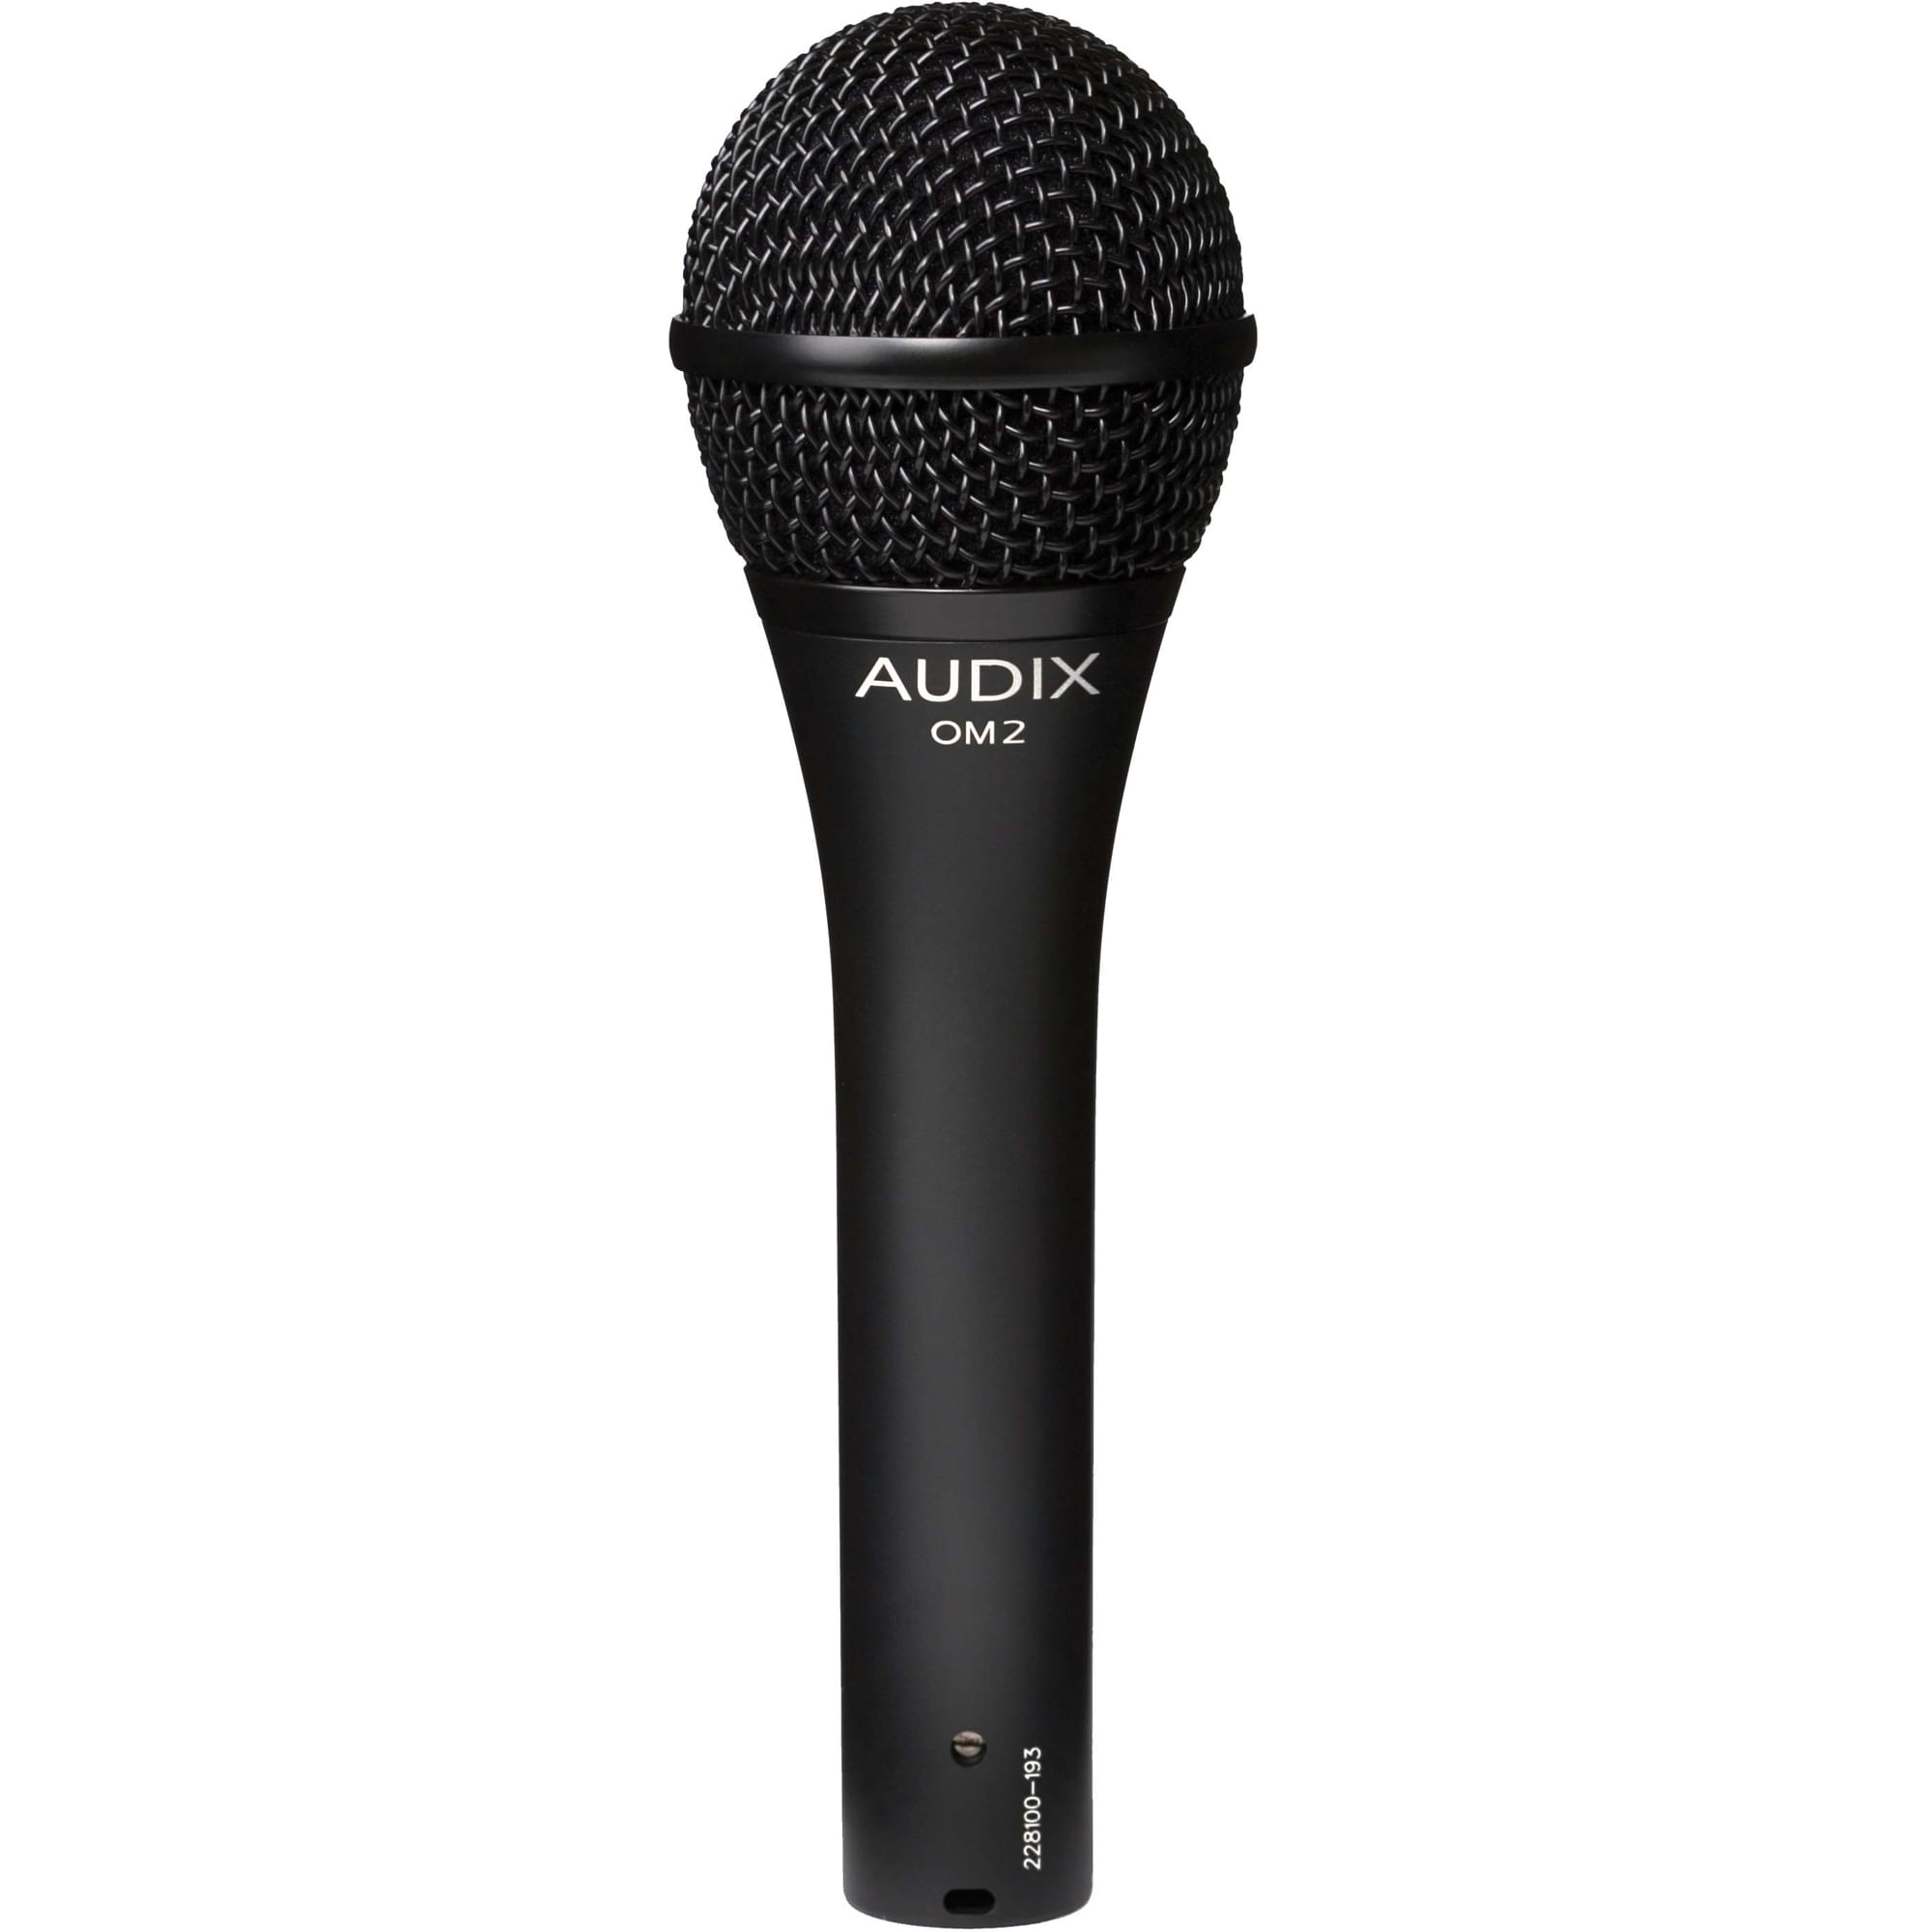 View larger image of Audix OM2S Dynamic Vocal Microphone with Switch